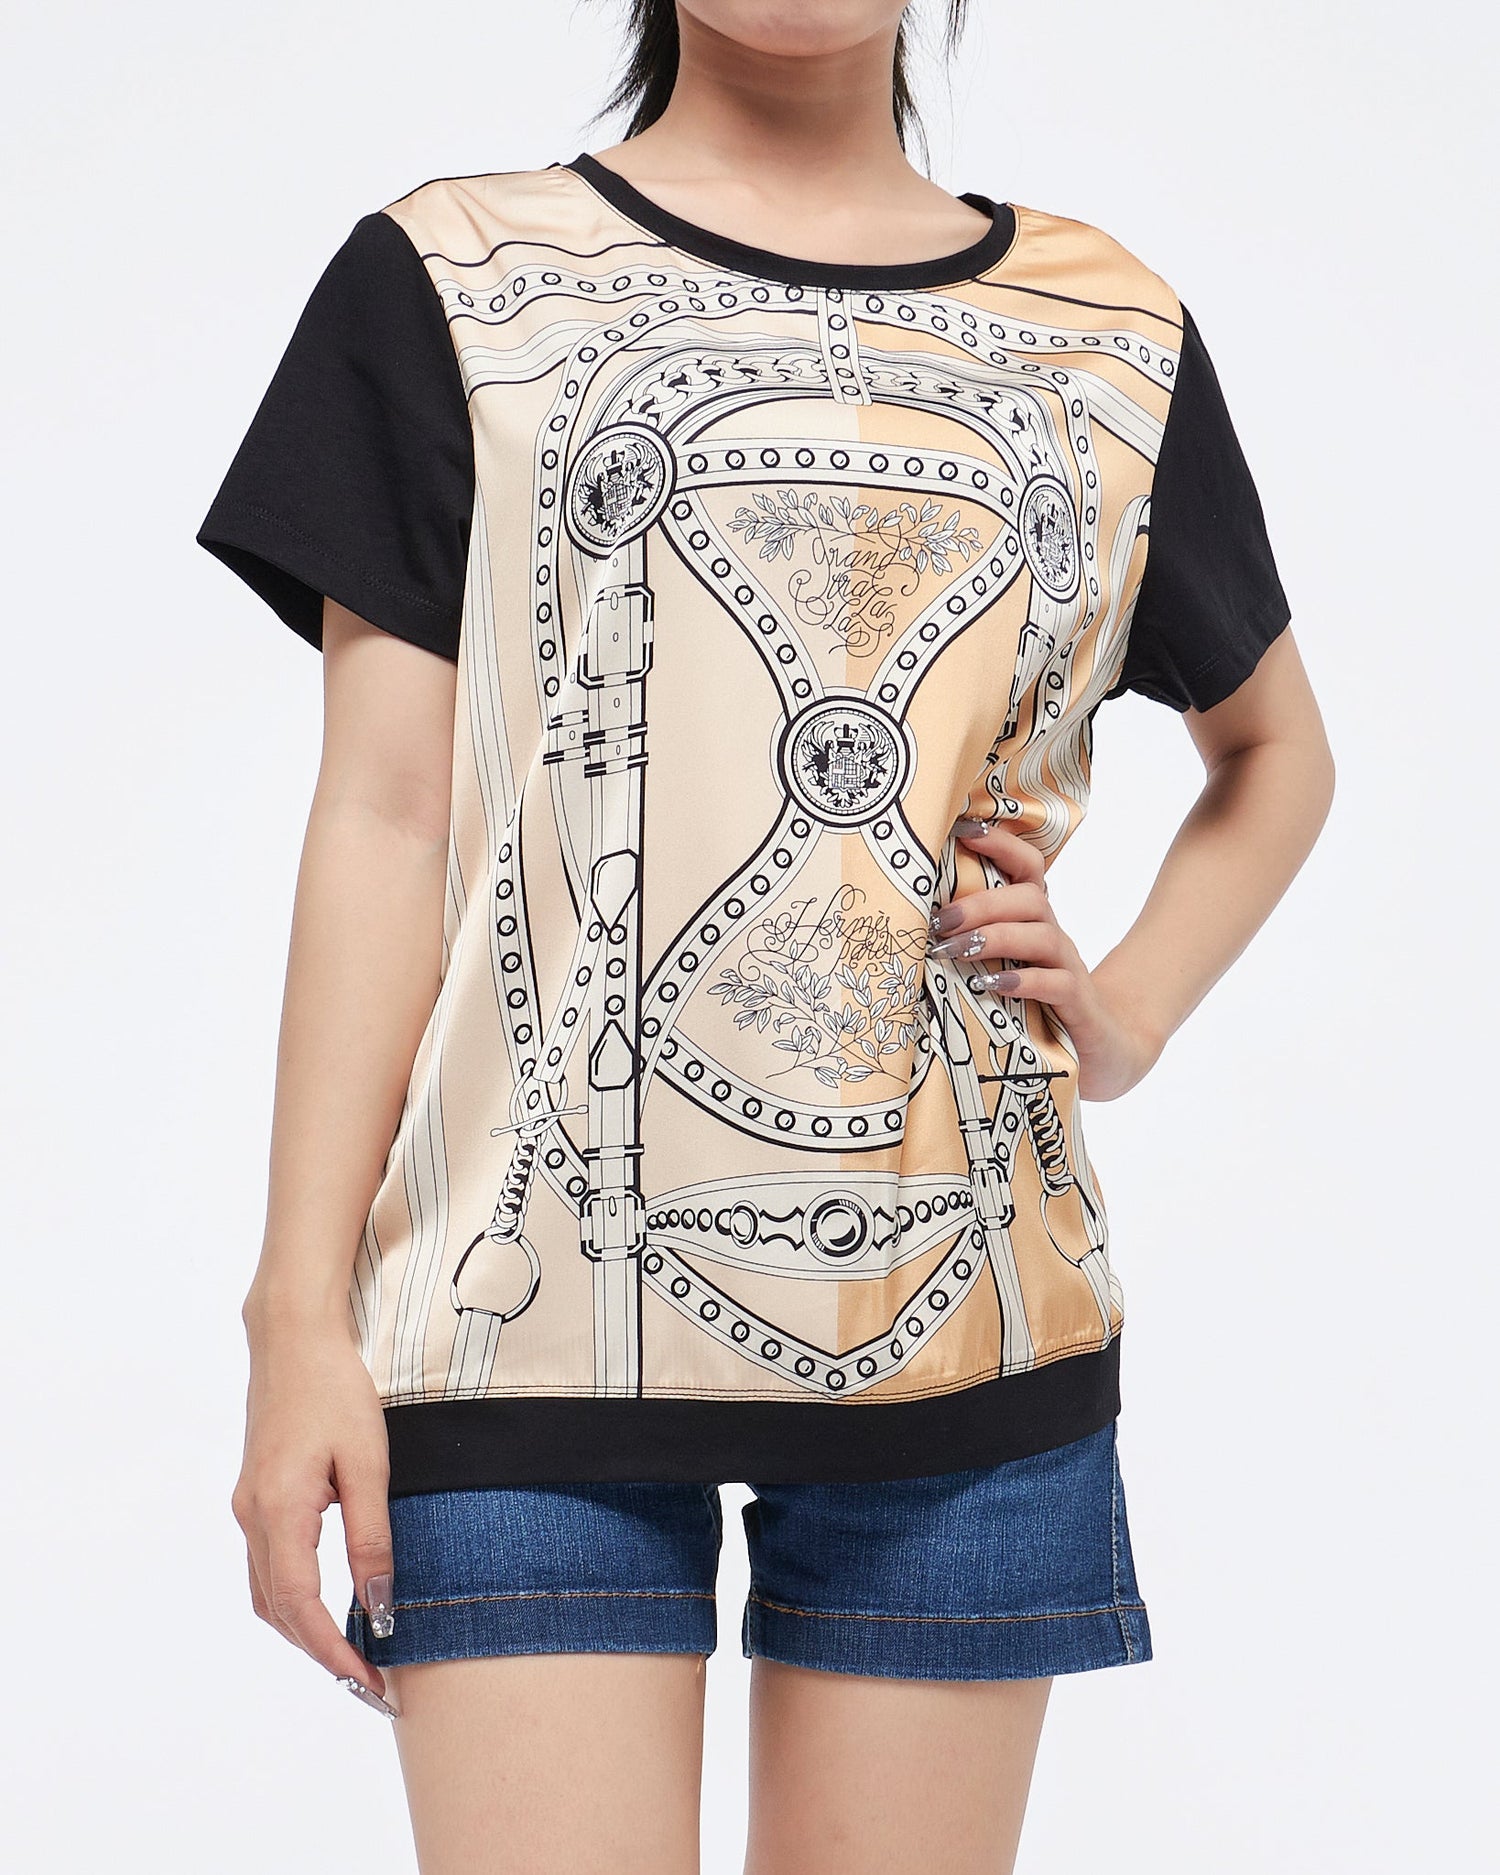 MOI OUTFIT-Chain Over Printed Lady T-Shirt 17.90